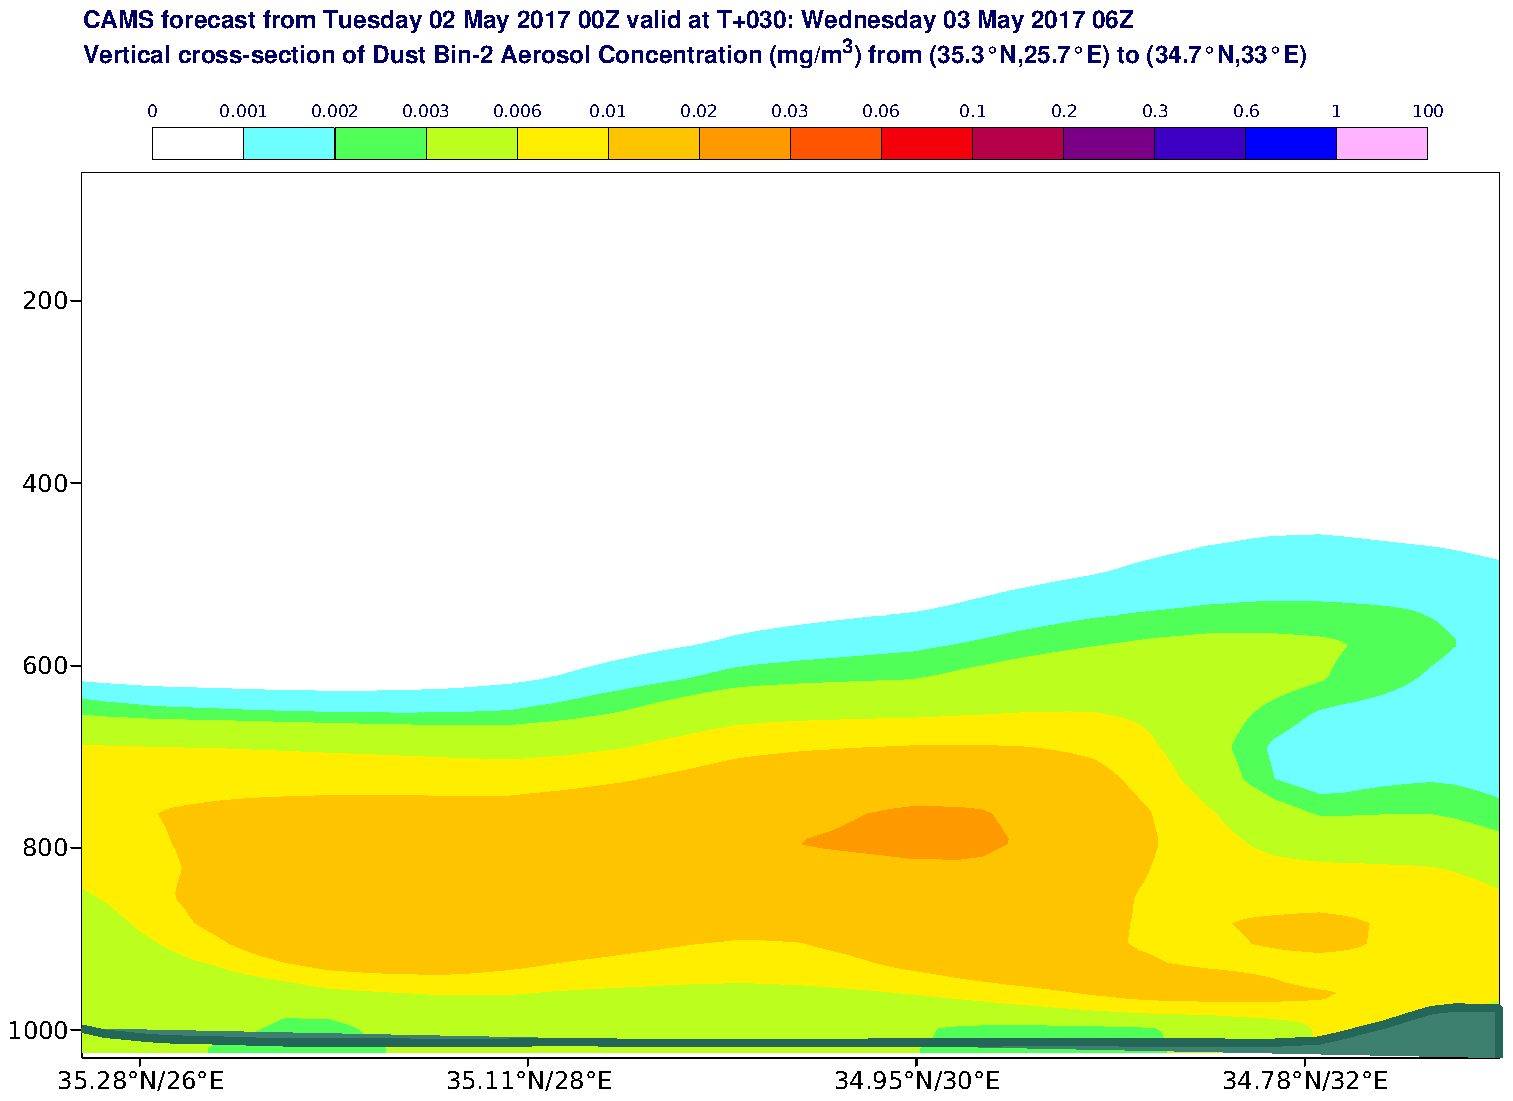 Vertical cross-section of Dust Bin-2 Aerosol Concentration (mg/m3) valid at T30 - 2017-05-03 06:00